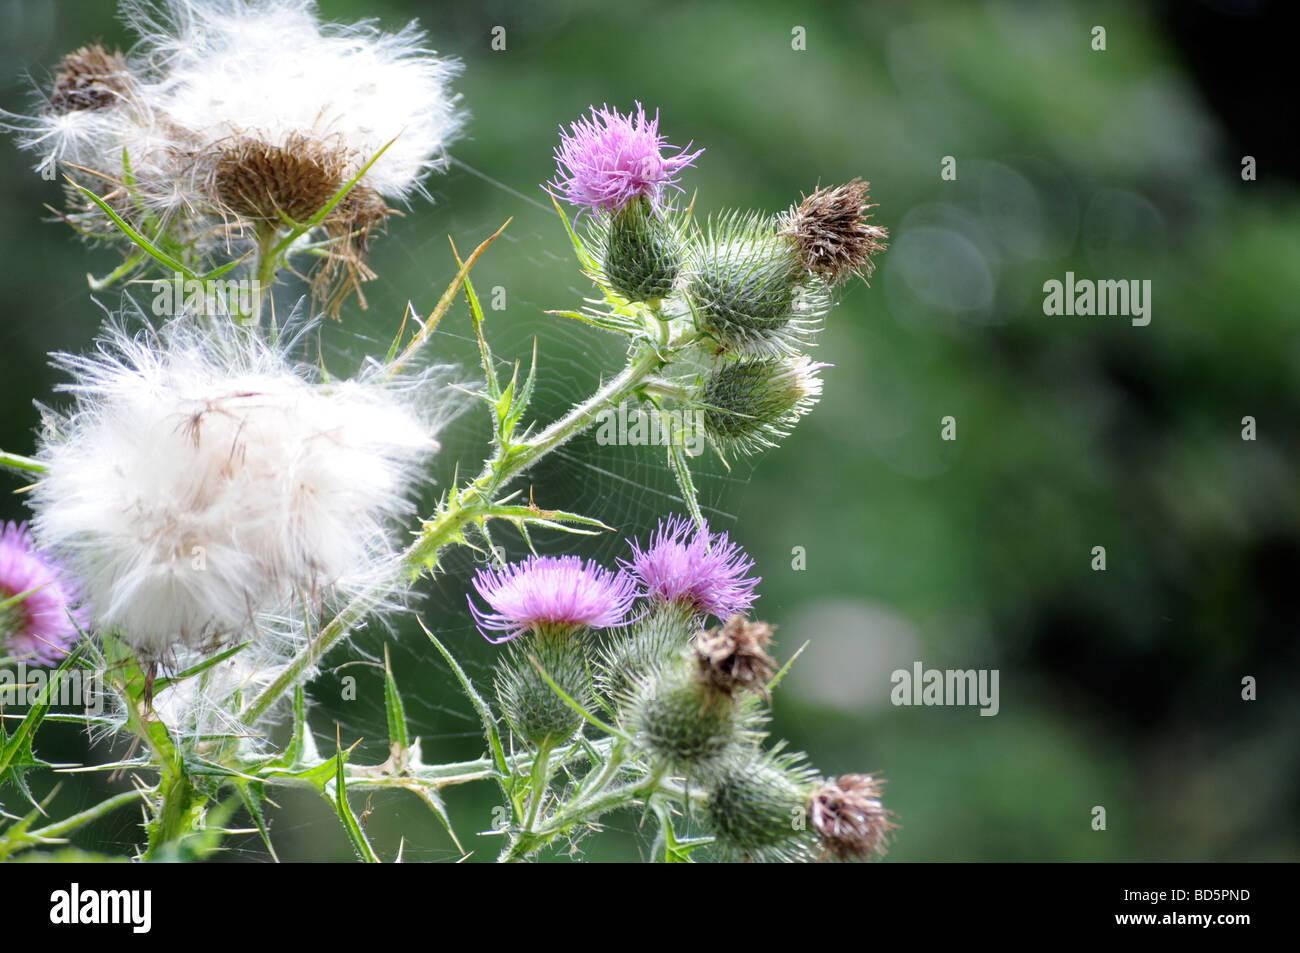 Royalty free close up photograph of flowering thistle in the UK countryside. Stock Photo